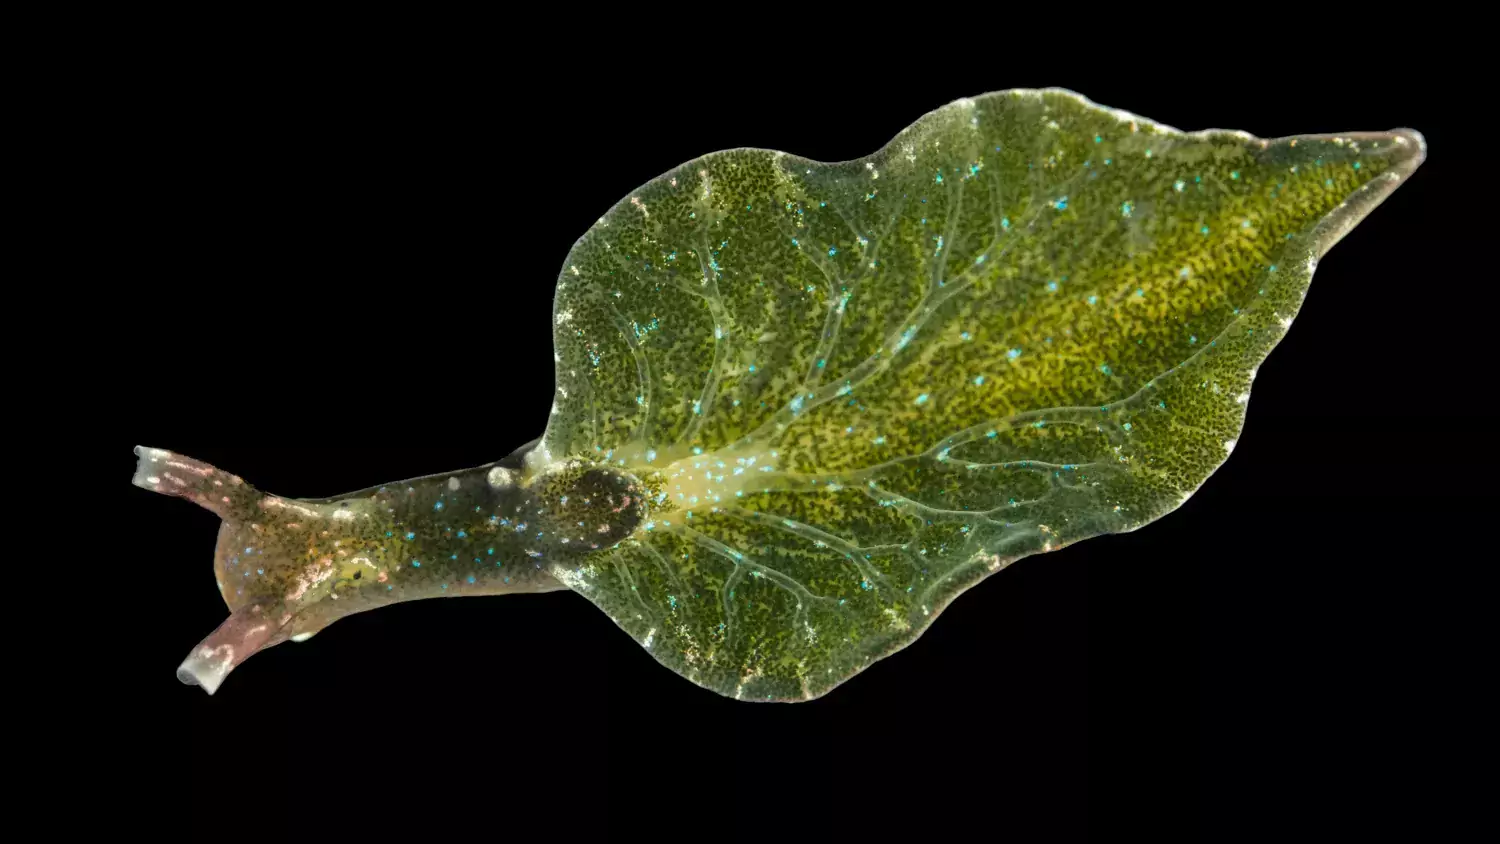 Elysia viridis (English name sap-sucking slug) is shell-less slug that feeds on green algae and extracts the chloroplasts. These stolen chloroplasts, also referred to as cleptoplastids, then continue to photosynthesize to the benefit of the slug.